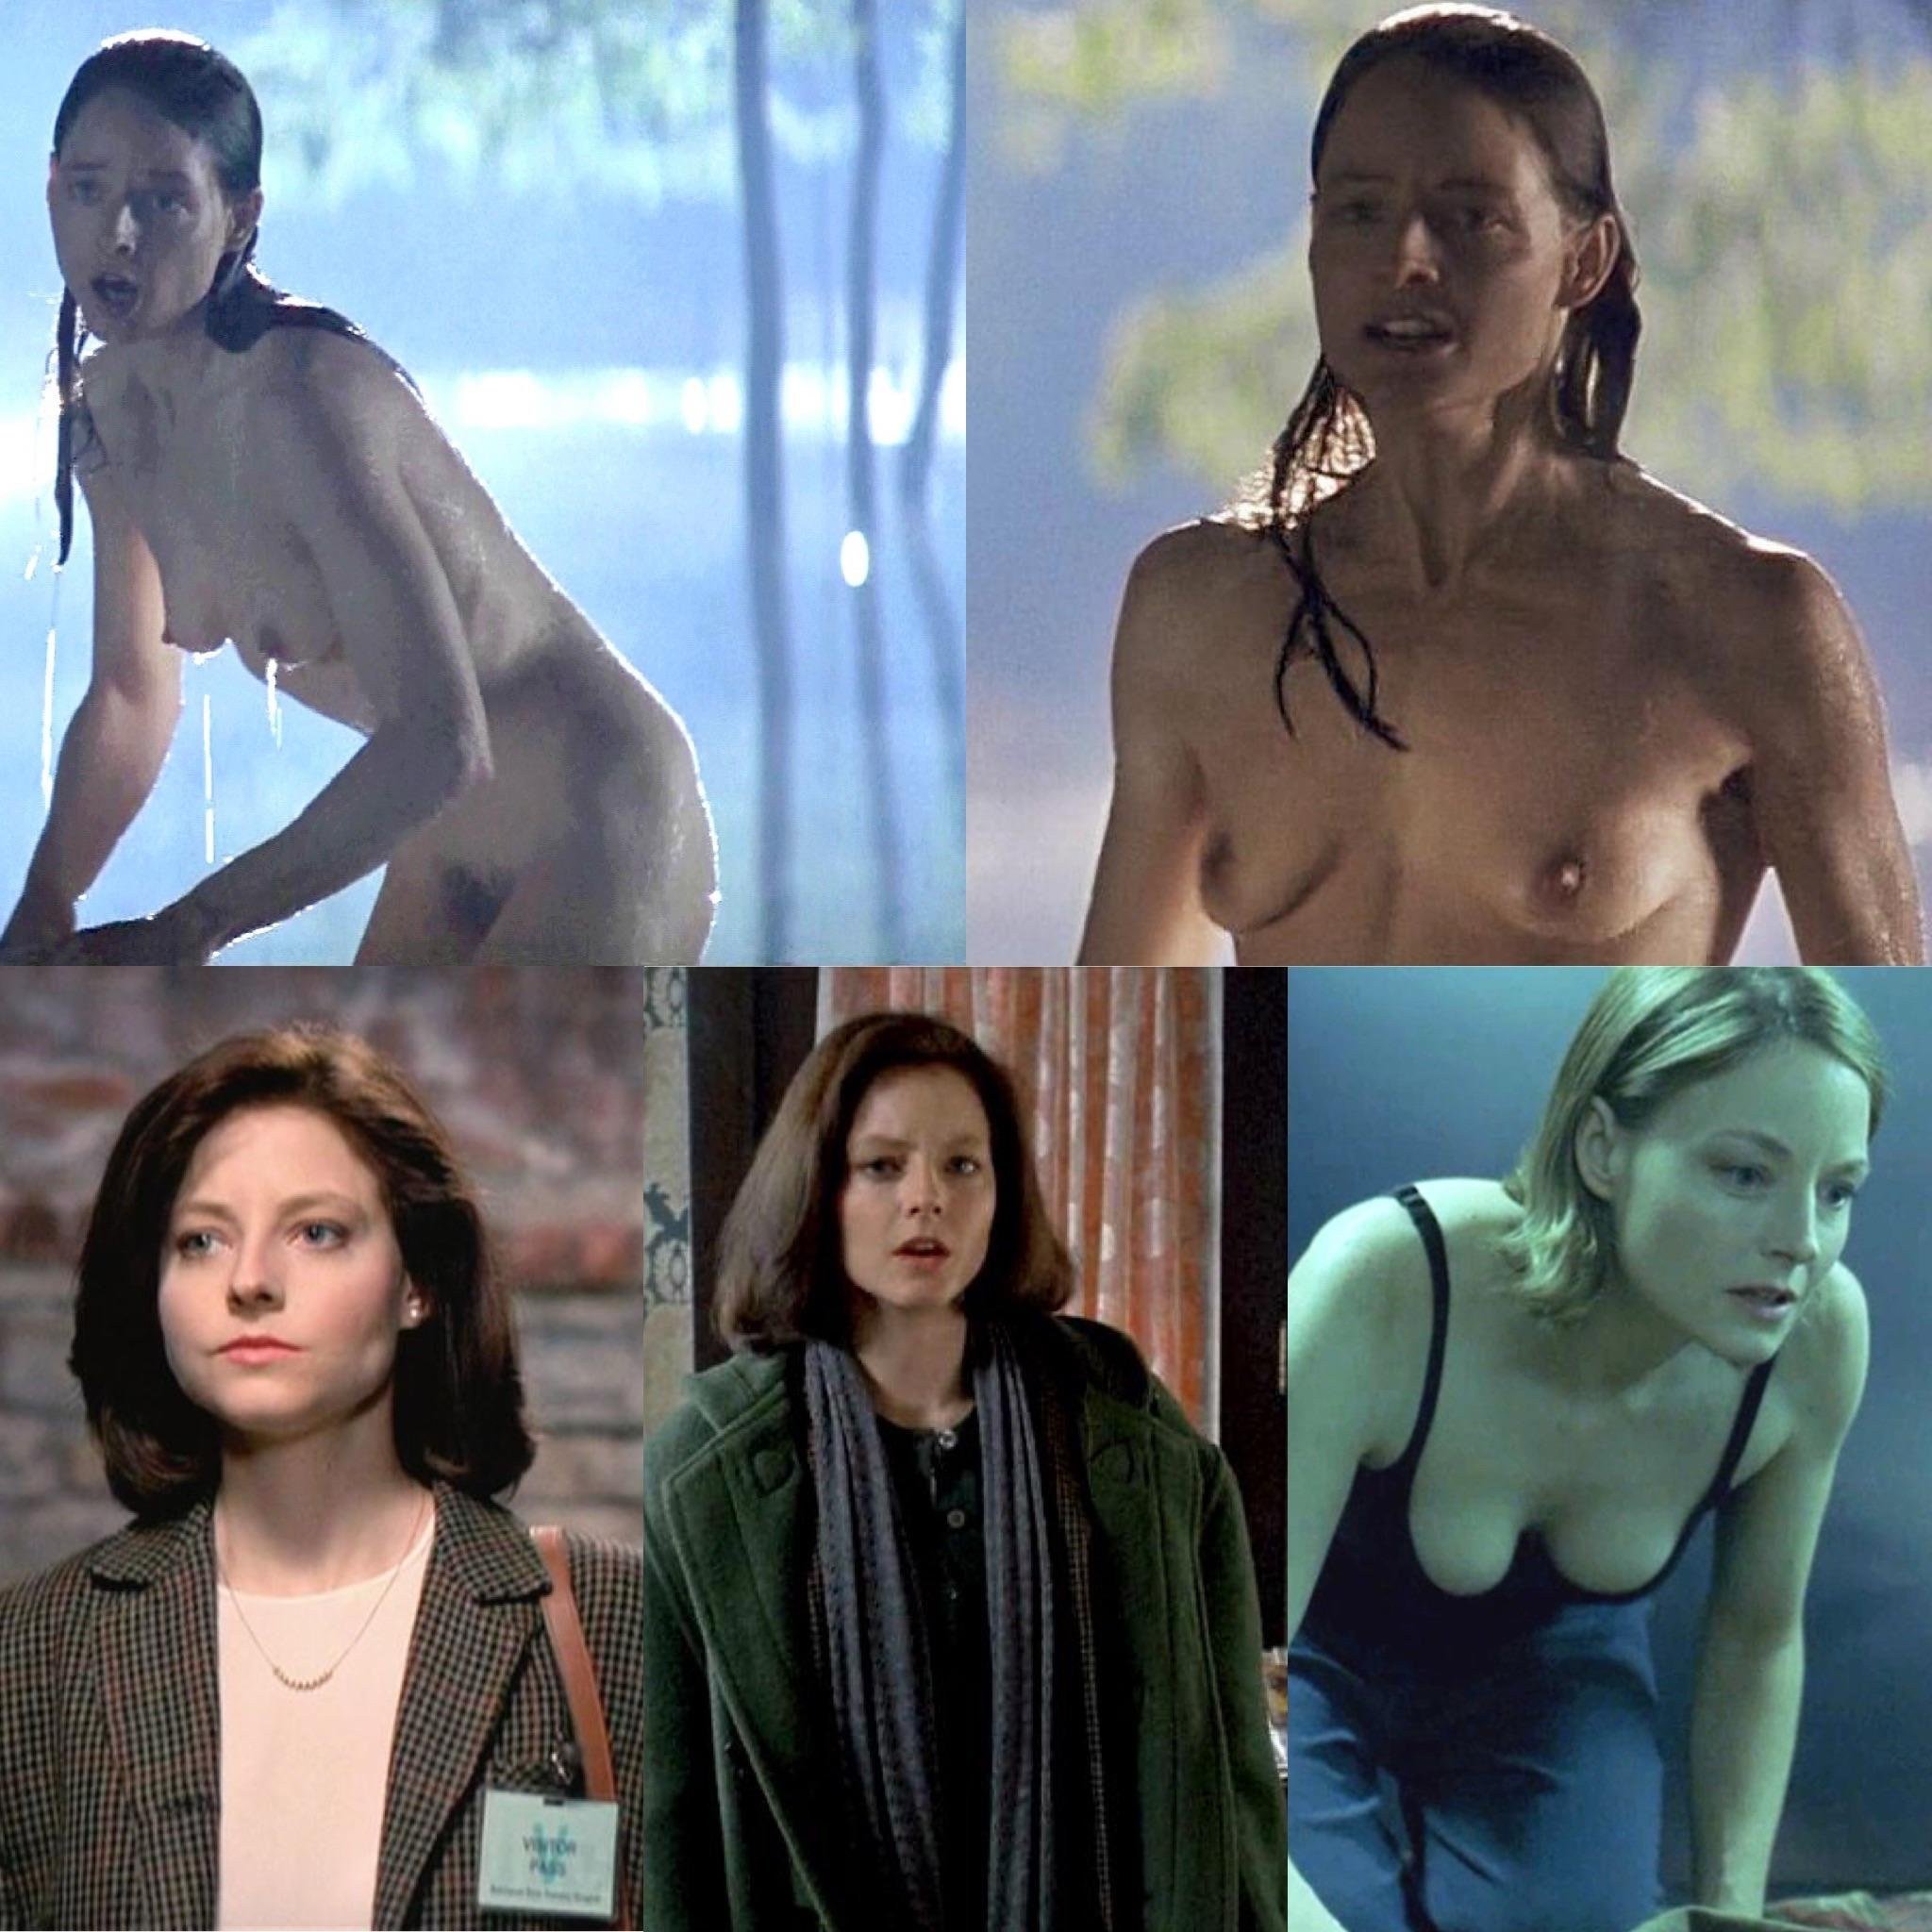 ashley norwood recommends jodie foster nude images pic